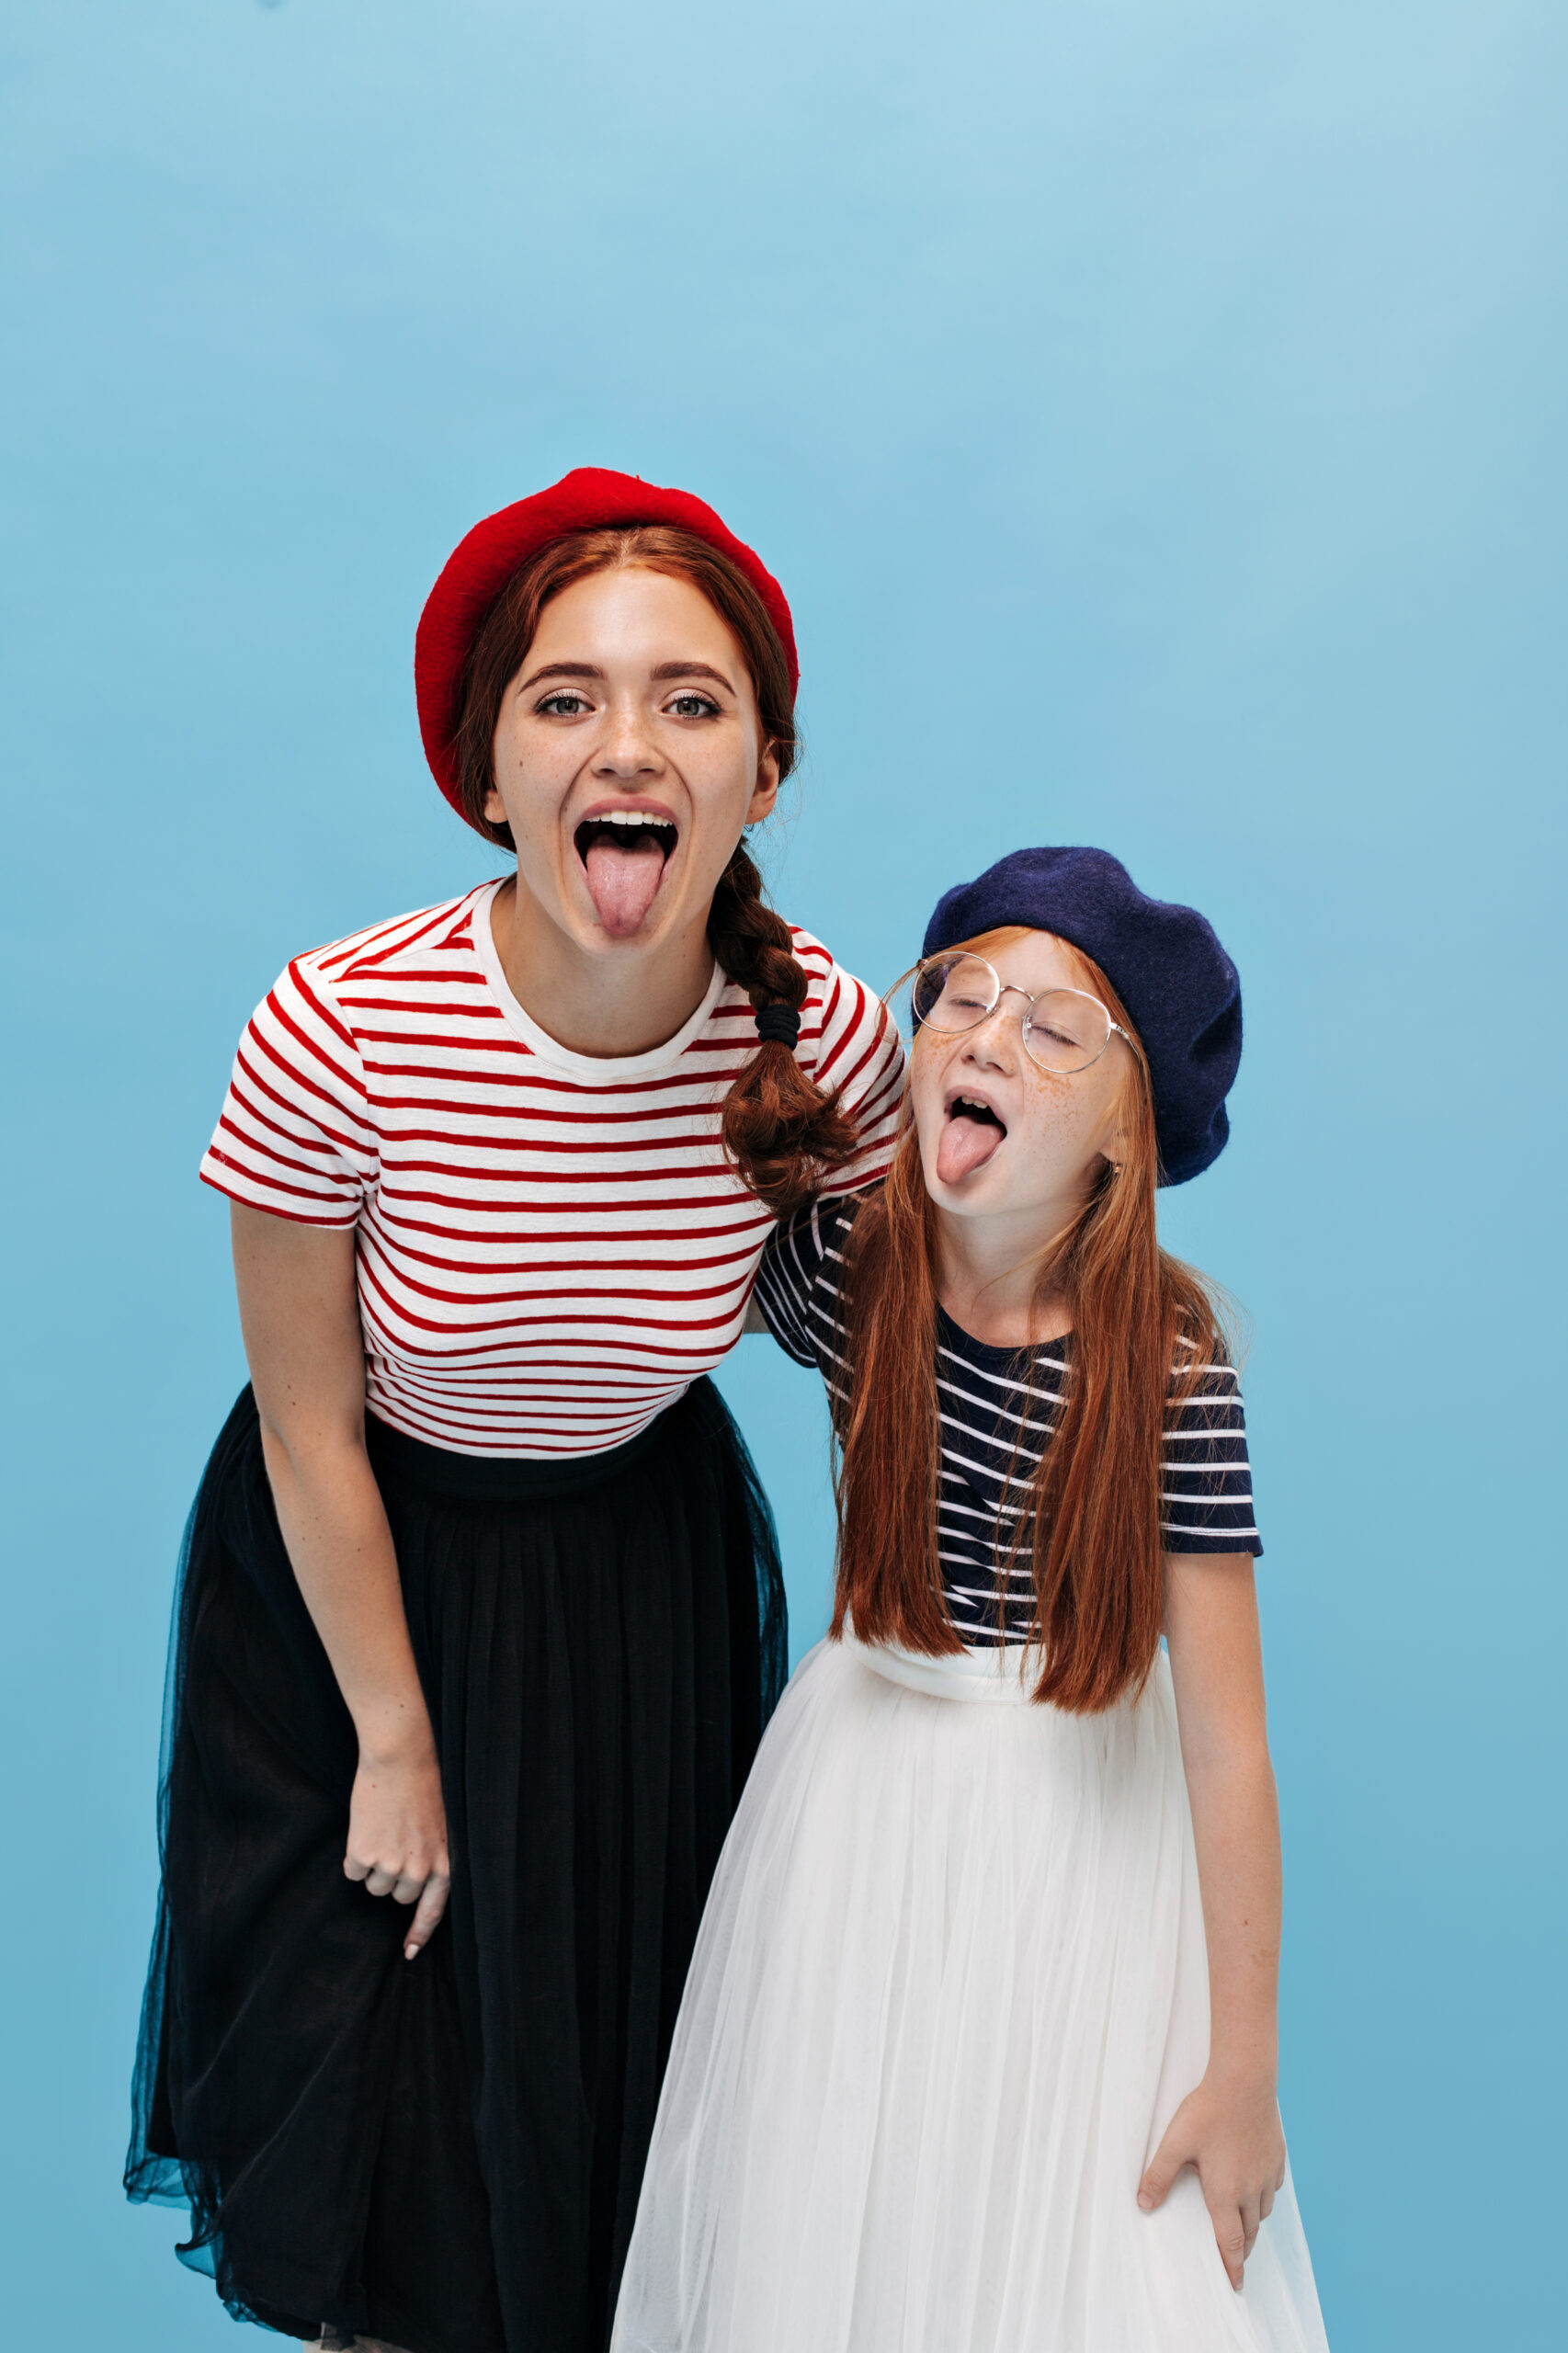 stylish-red-haired-young-women-bright-berets-cool-skirts-stylish-tshirts-showing-tongues-isolated-blue-background-scaled.jpg